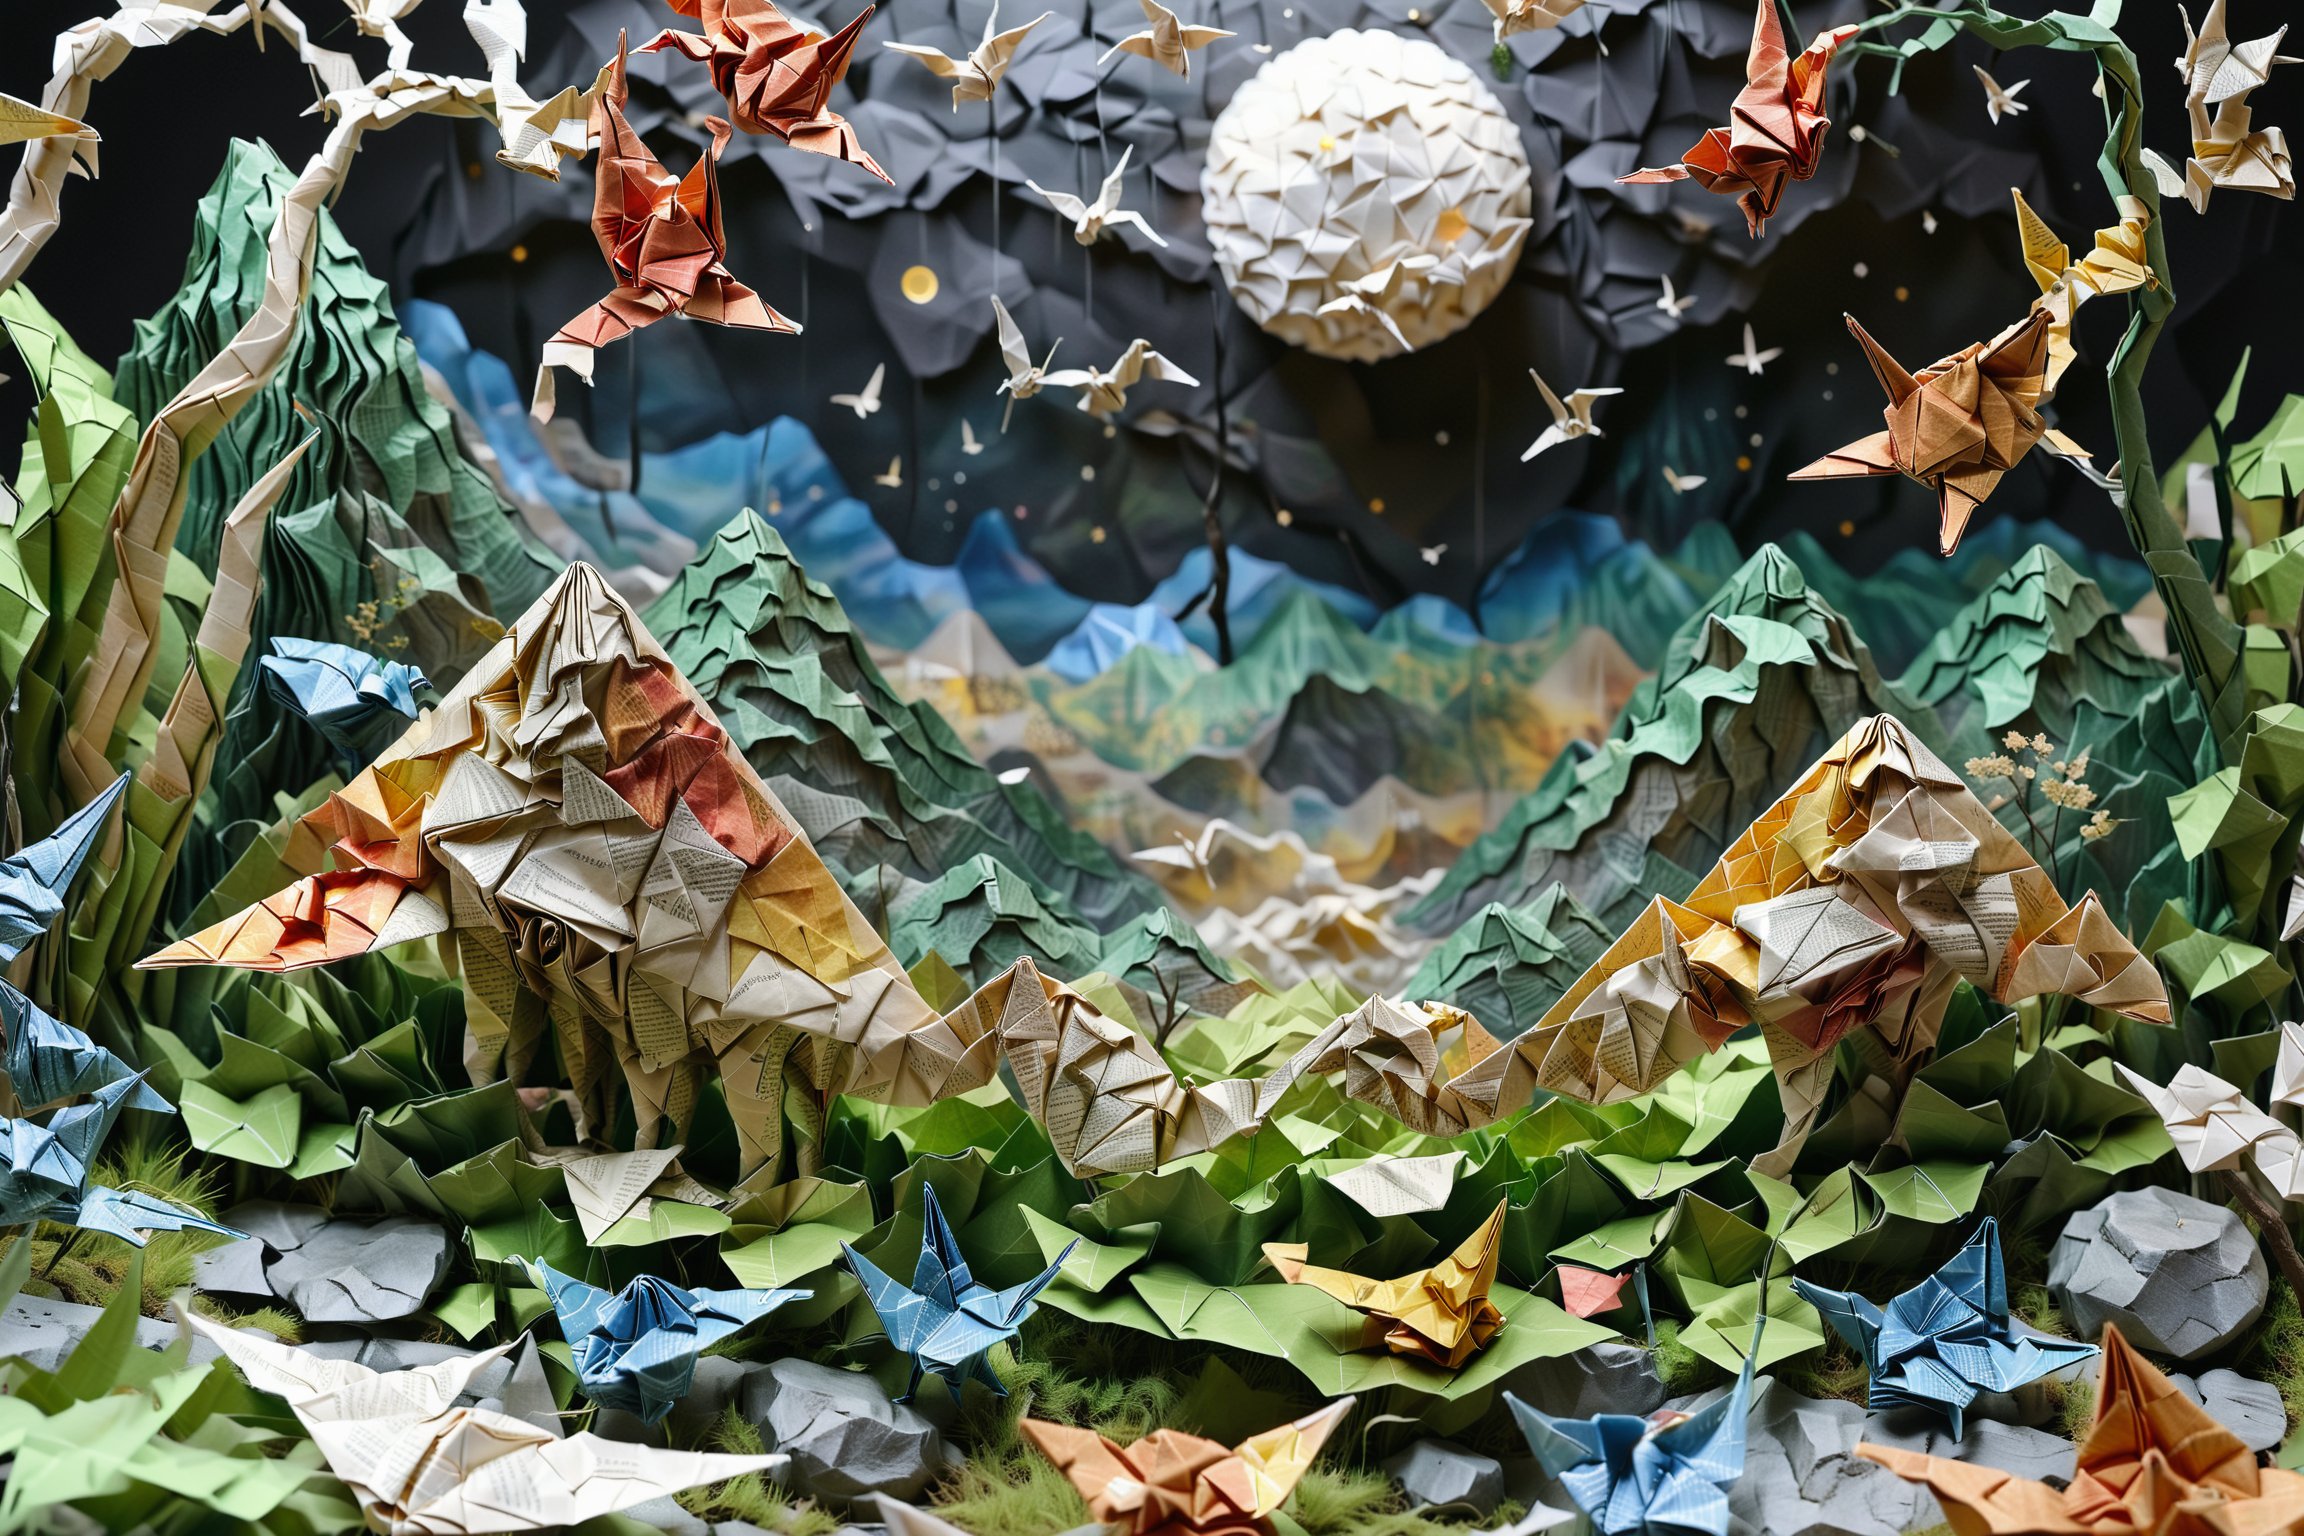 score_9, score_8_up, score_7_up, score_6_up, a large intricately crafted origami_landscape, incredibly detailed and beautiful maintain focus, Aerial shot, very zoomed out, night, no_light_noise, moon_light, artfully crafted crumpled paper galaxy poked full of holes many colored lights shining through, intricately crafted reflective paper origami moon, ethereal glowy smoke in the valley, soft light particles in focus, scenery closer made of meticulously detailed origami with visible folds and creases, distrant swirled tissue paper origami waterfall, crumpled paper stones, origami boulders, cut origami leaves on trees,shredded paper blades of grass, intricately detailed, detailmaster2, more detail XL